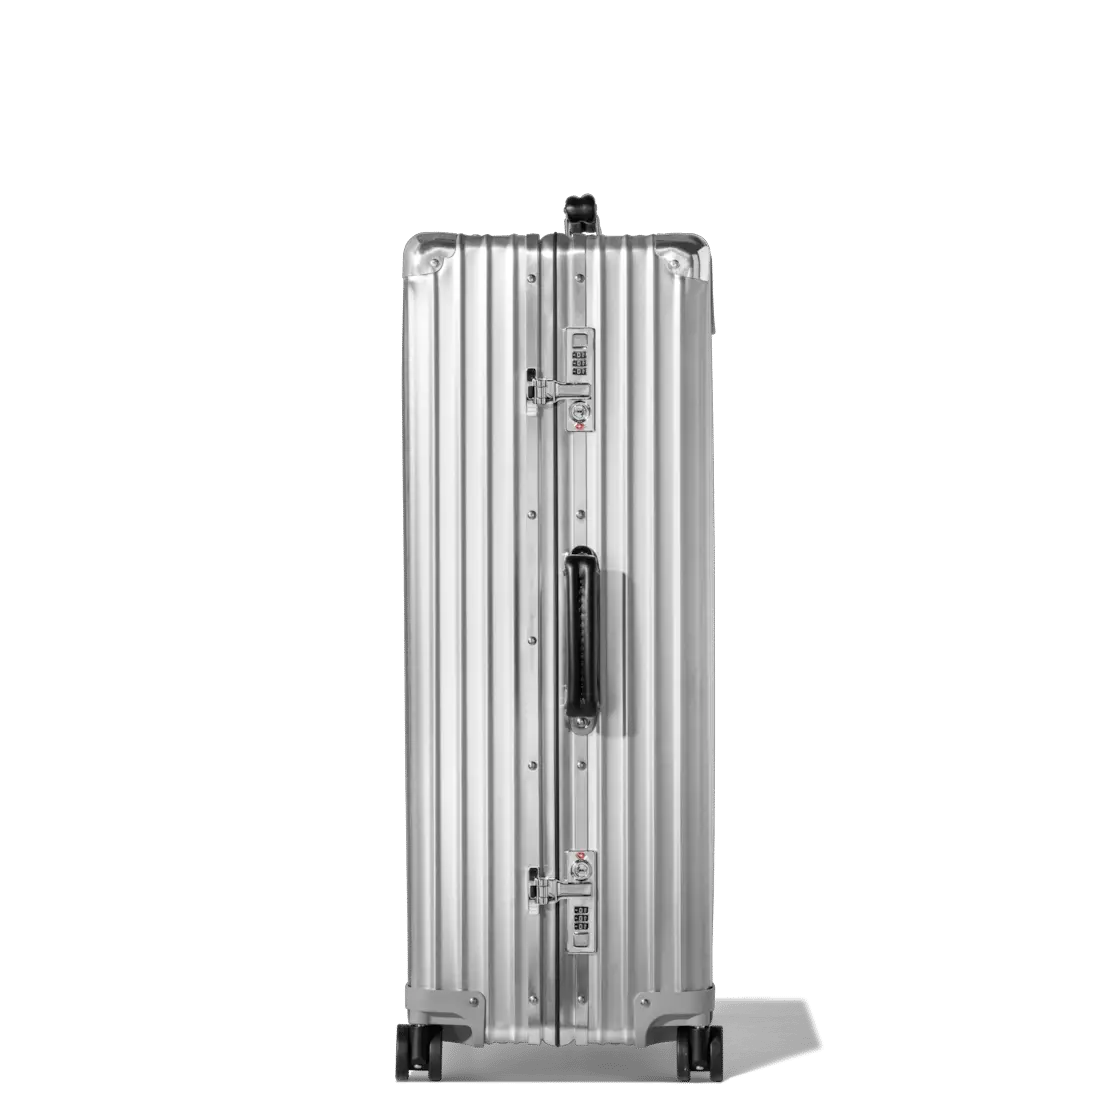 The Rimowa Classic Flight – Old School Cool or Outdated?